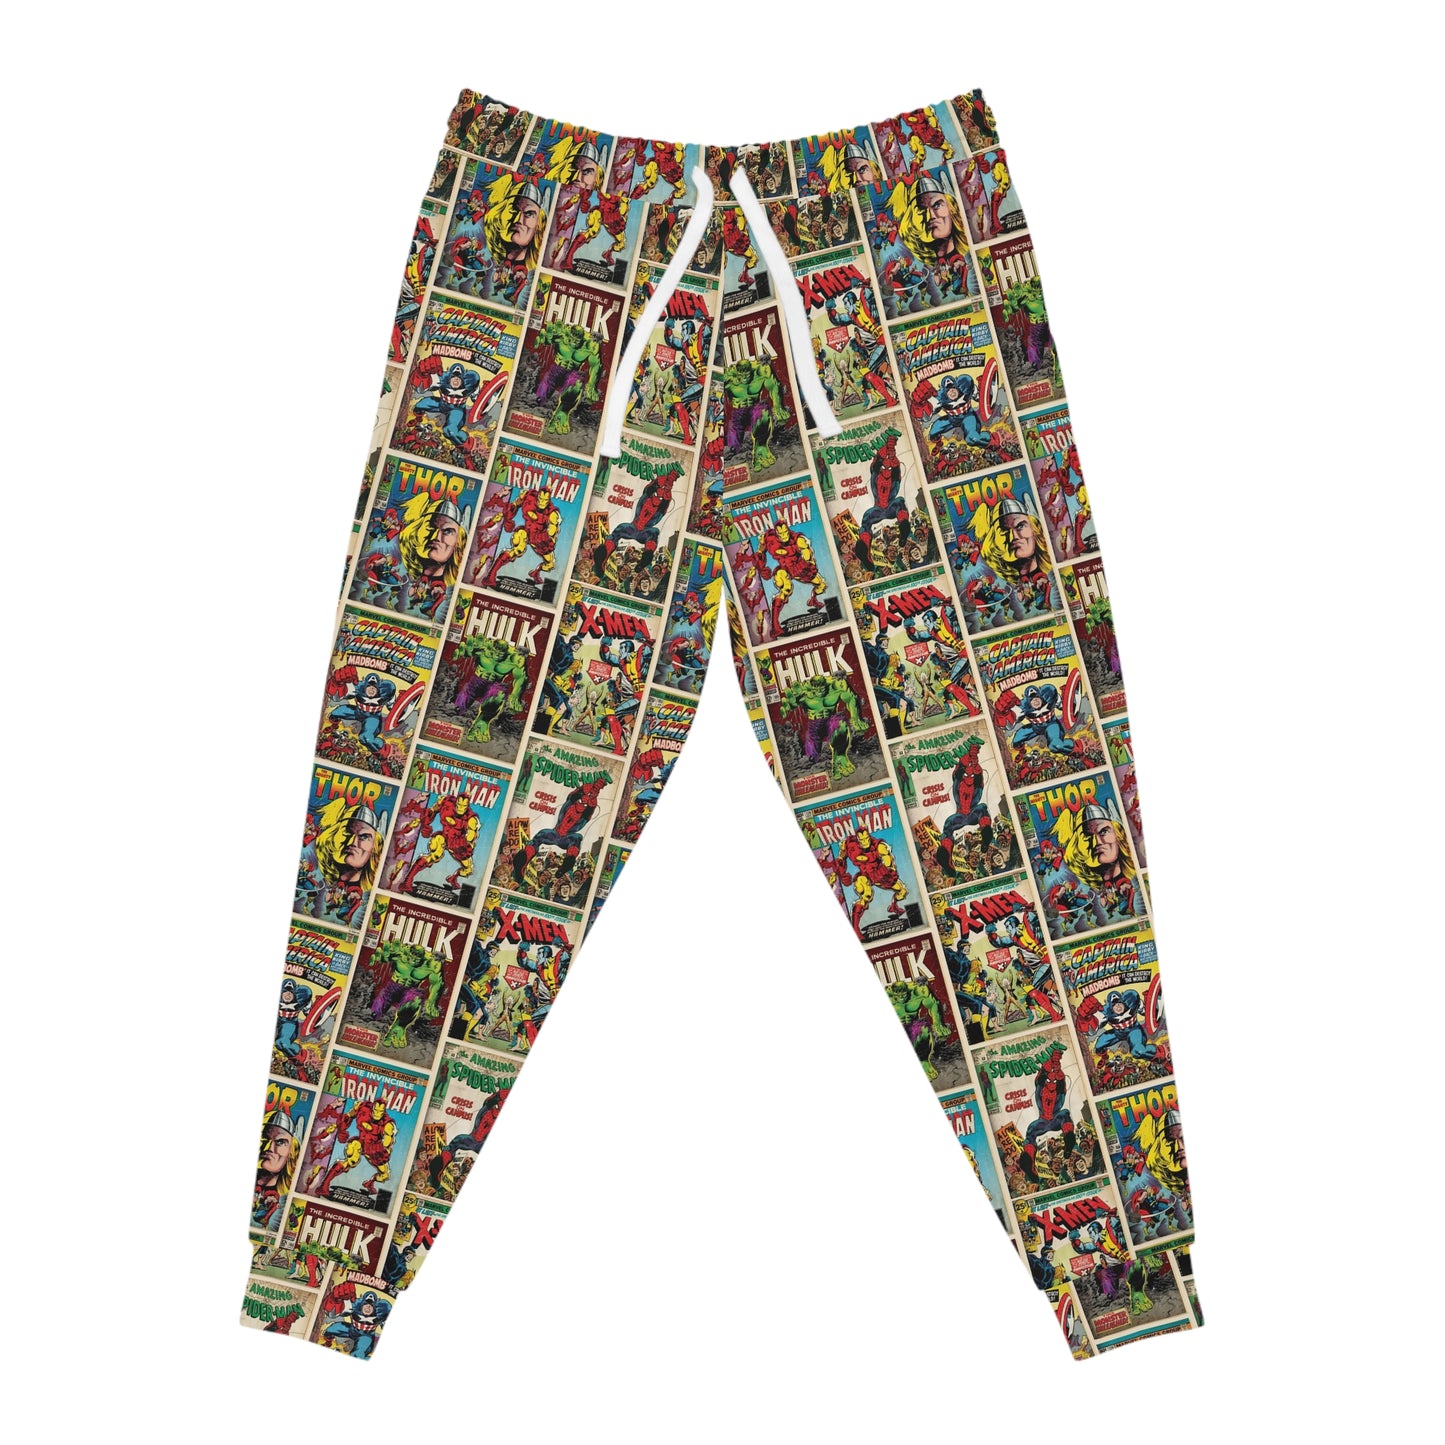 Marvel Comic Book Cover Collage Athletic Jogger Sweatpants